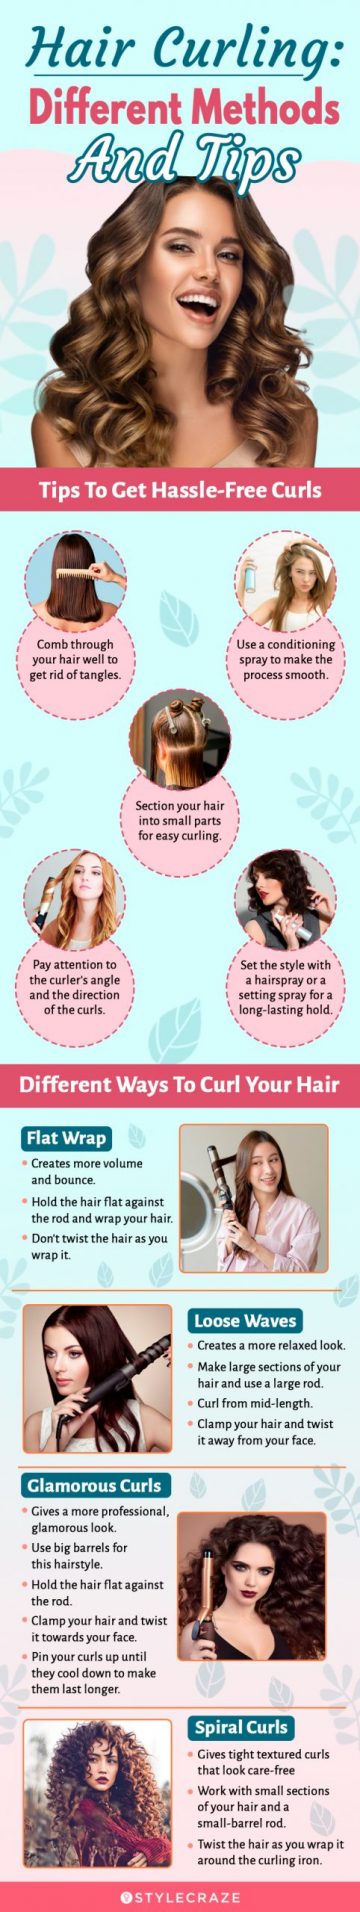 Hair Curling Tips And Different Methods You Can Try (infographic)